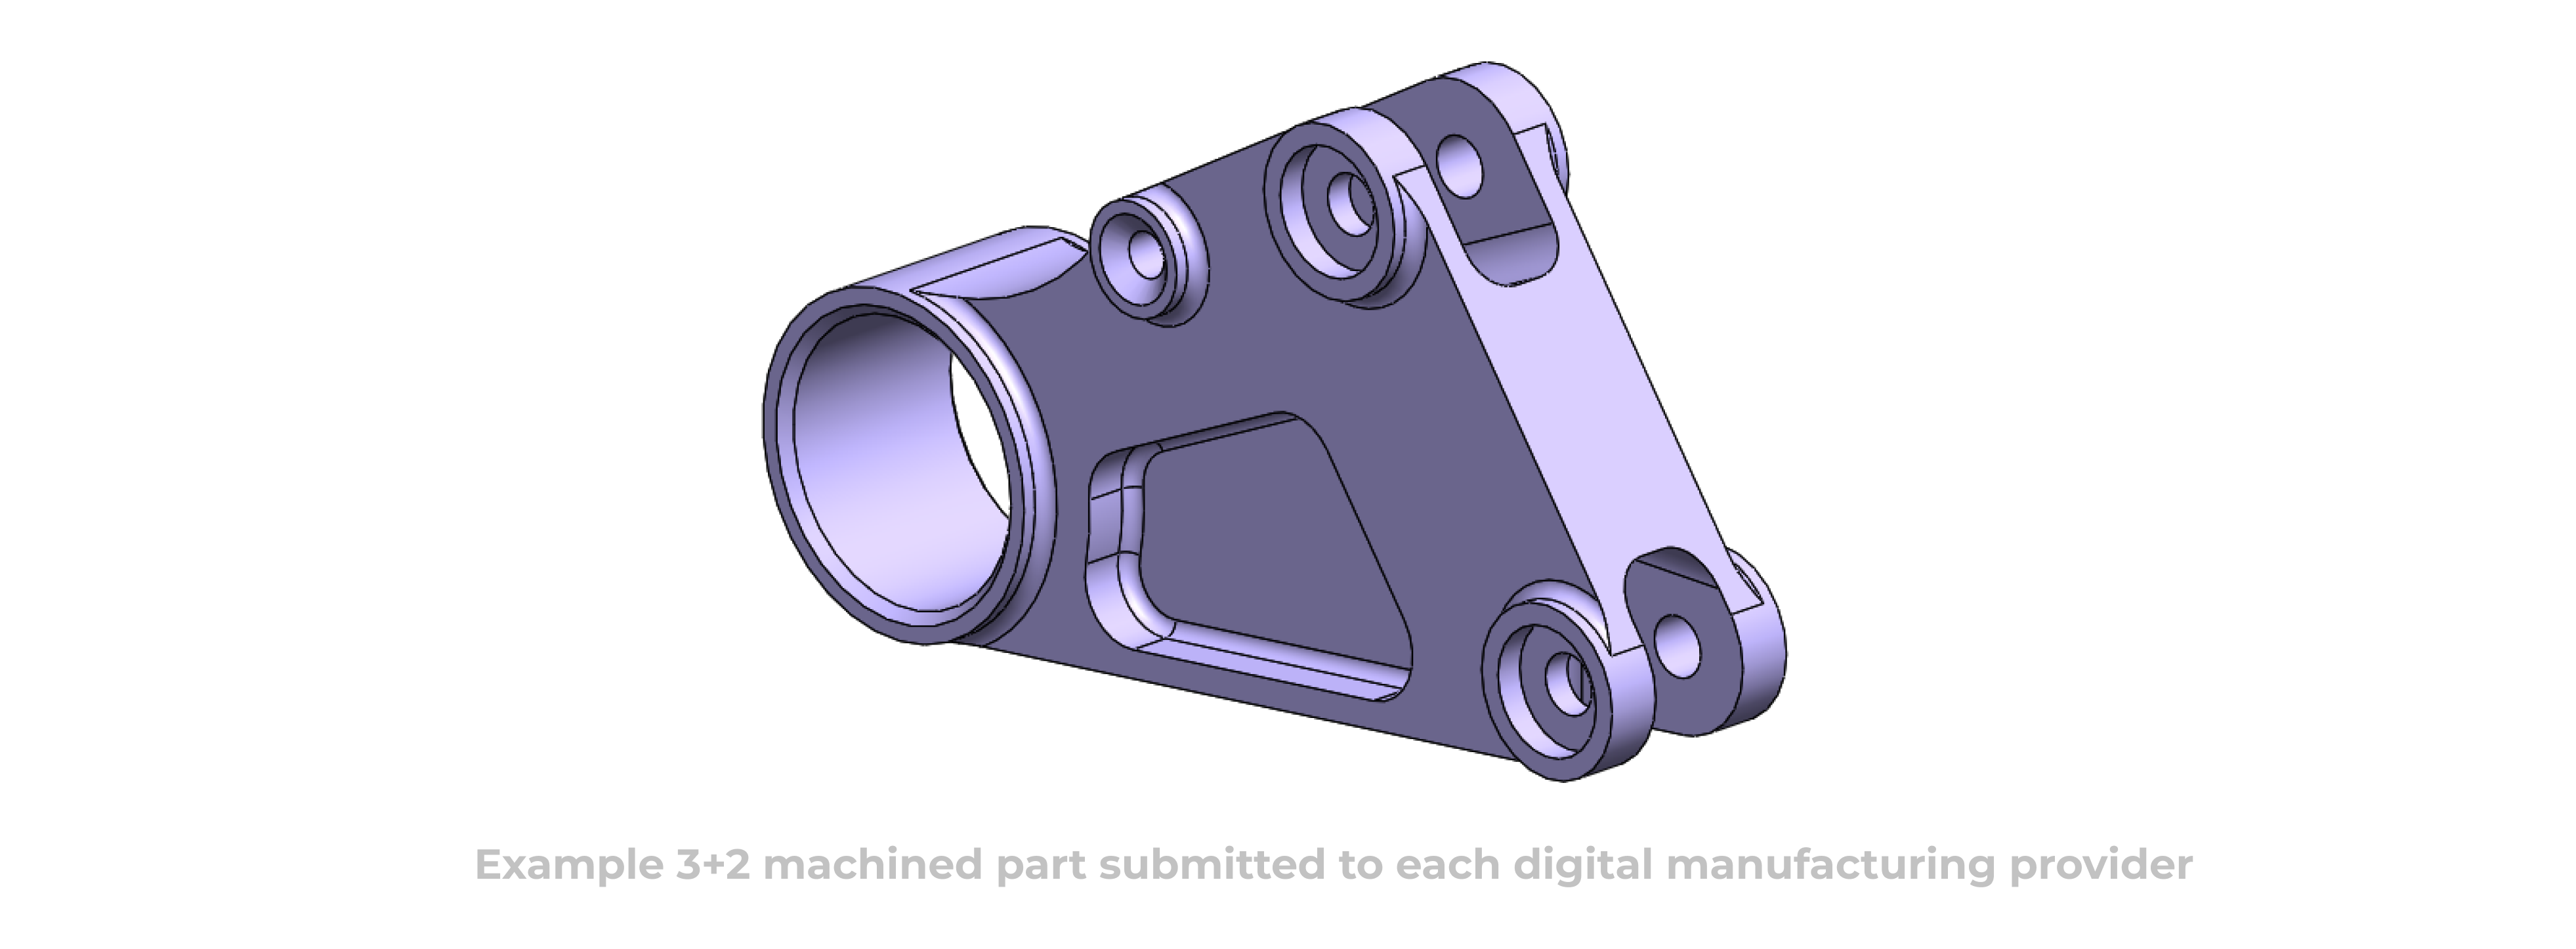 Test part submitted to US digital fabrication providers 